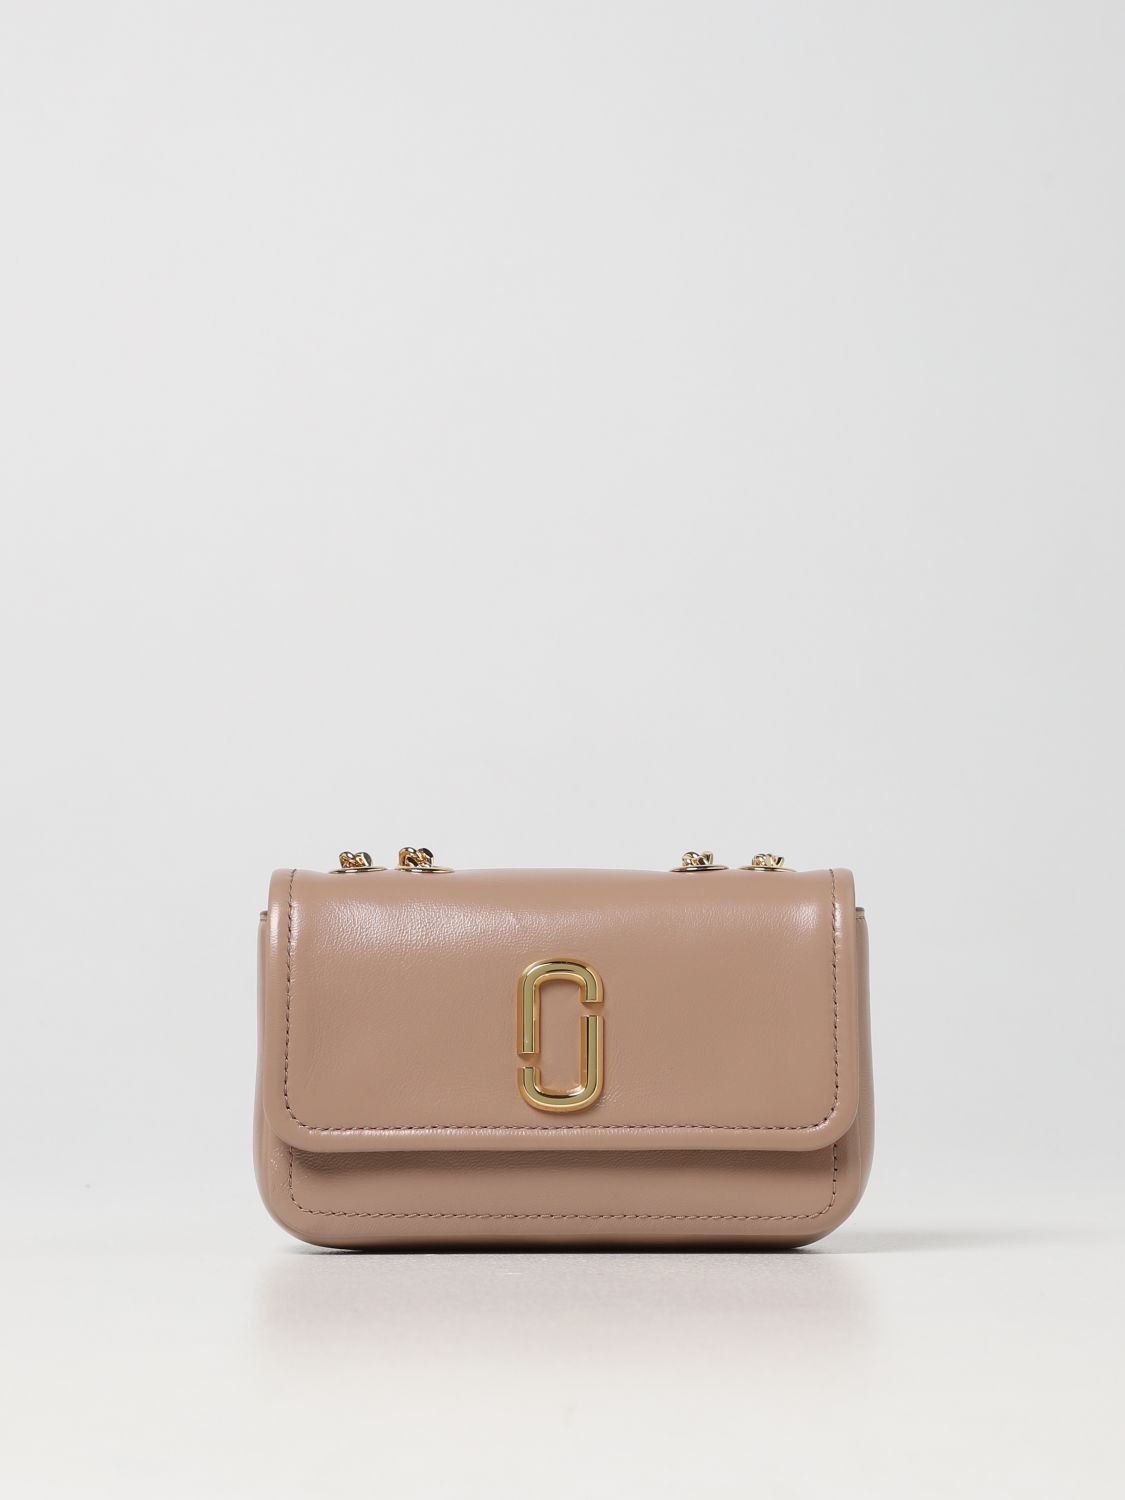 MARC JACOBS: The Glam Shot leather bag - Beige